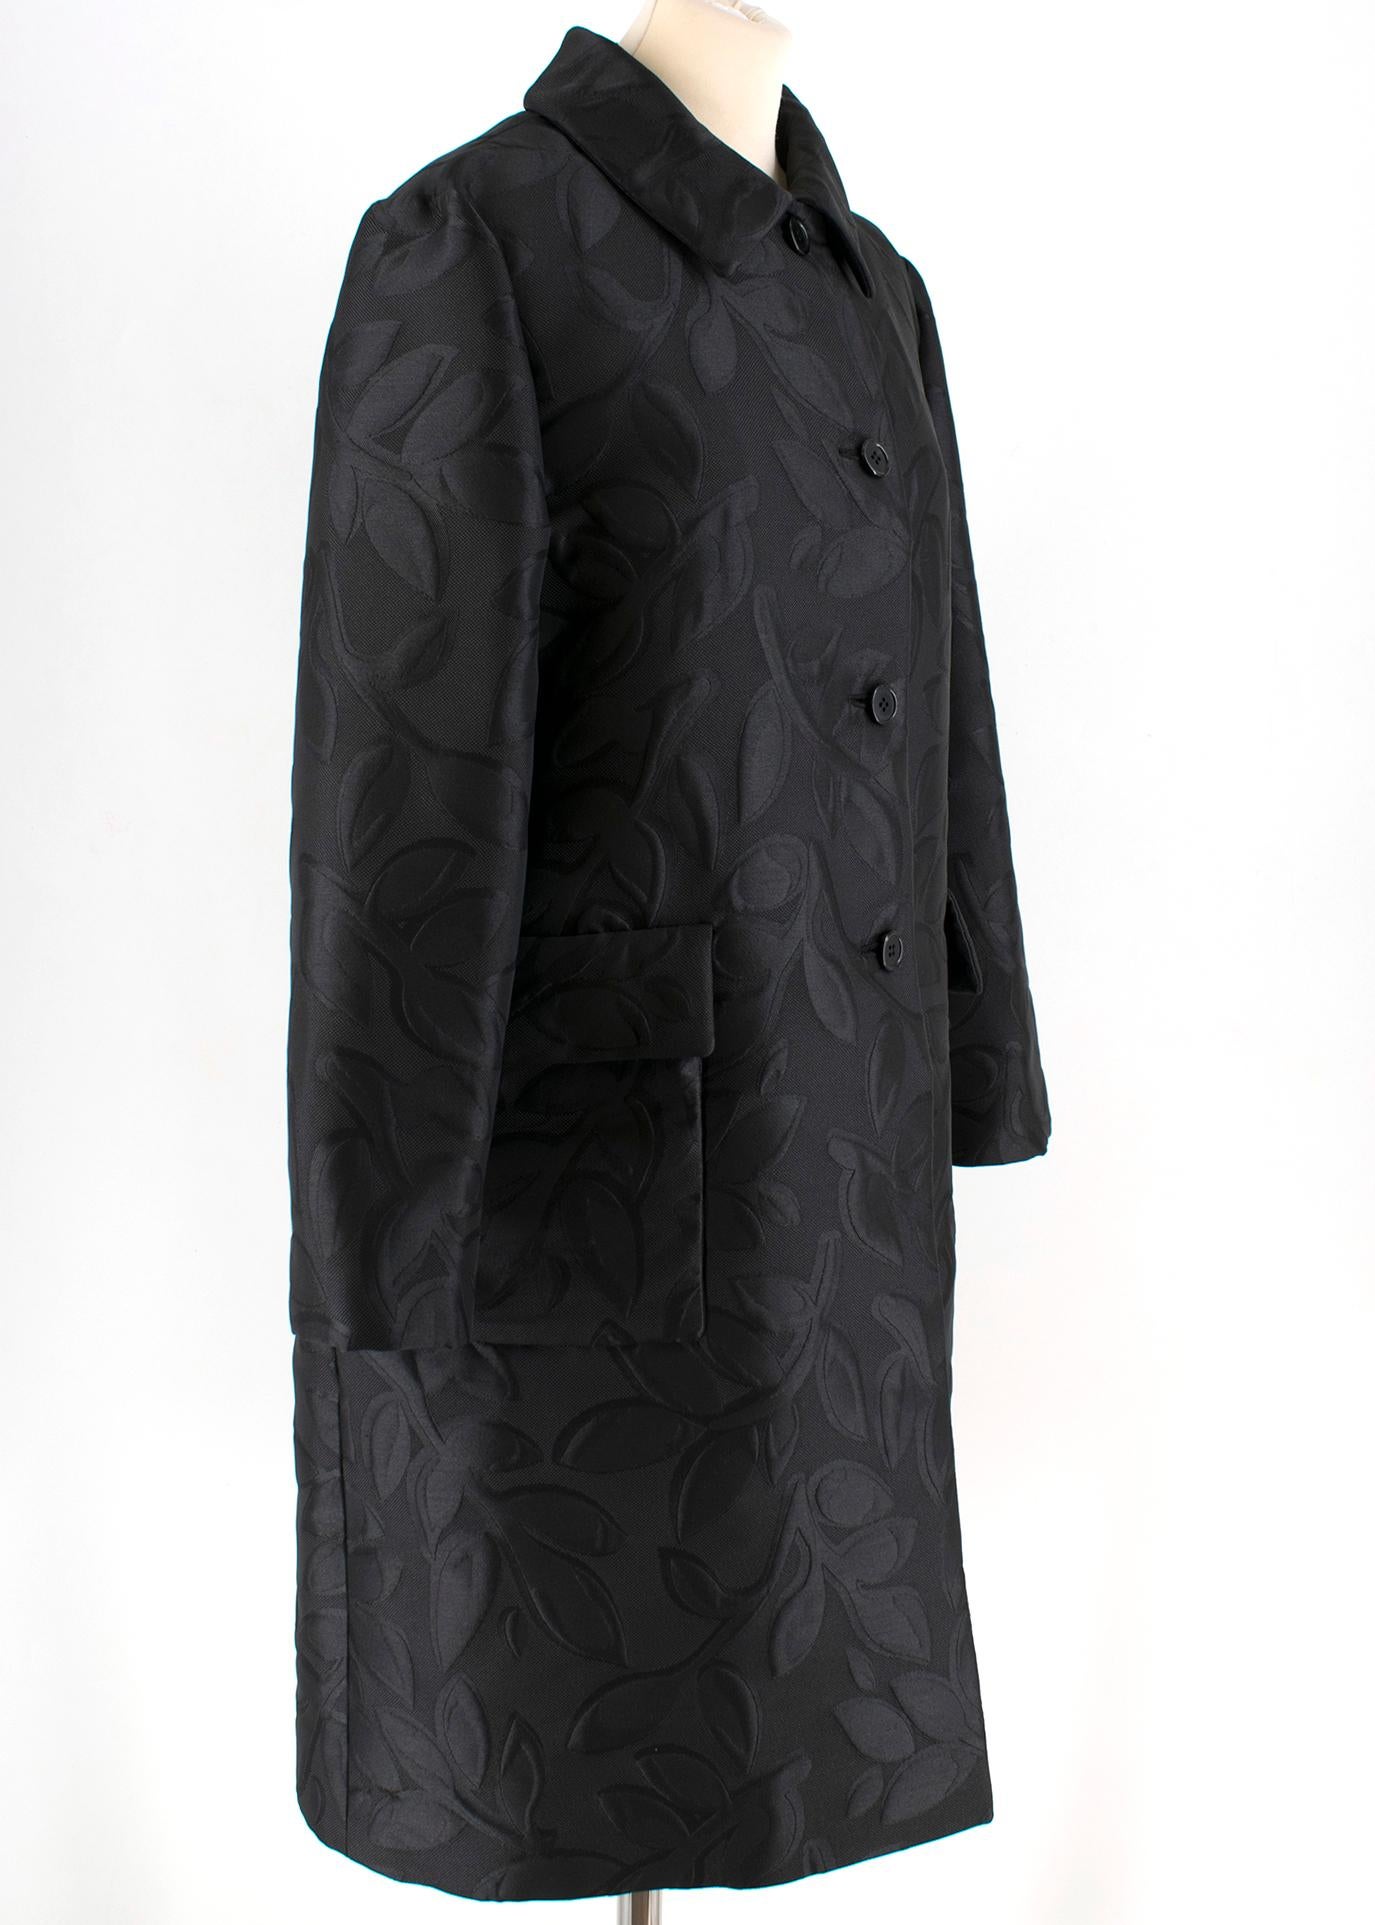 Marni Black Leaves Embroidered Coat

- black coat
- leaf pattern 
- linned
- button fastening to the front 
- flip pockets to the front 

Please note, these items are pre-owned and may show some signs of storage, even when unworn and unused. This is